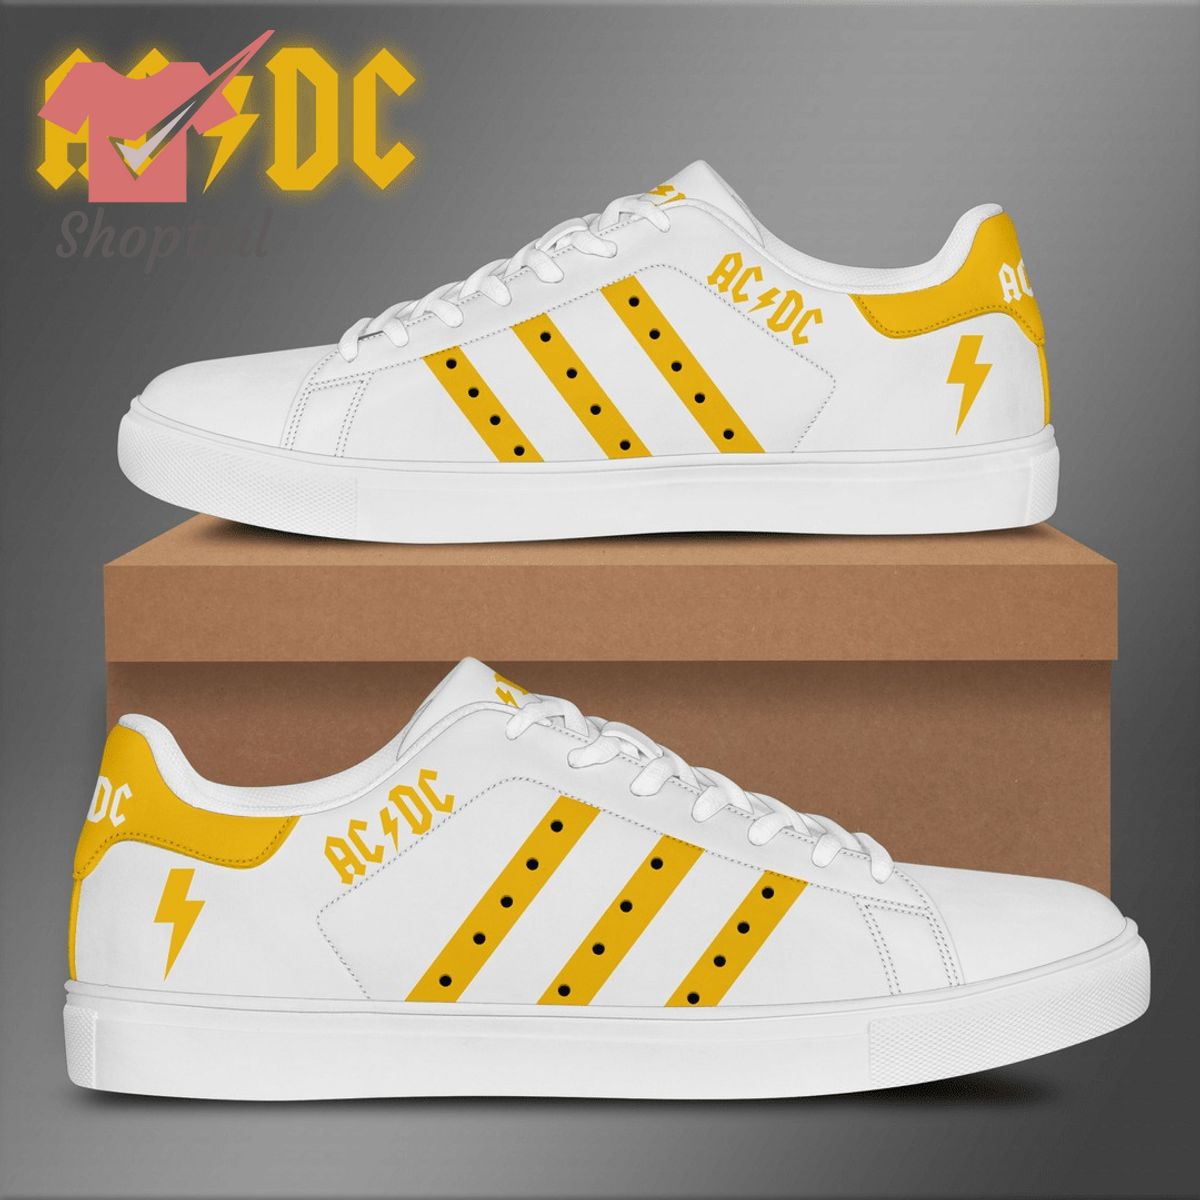 AC/DC white yellow stan smith low top shoes